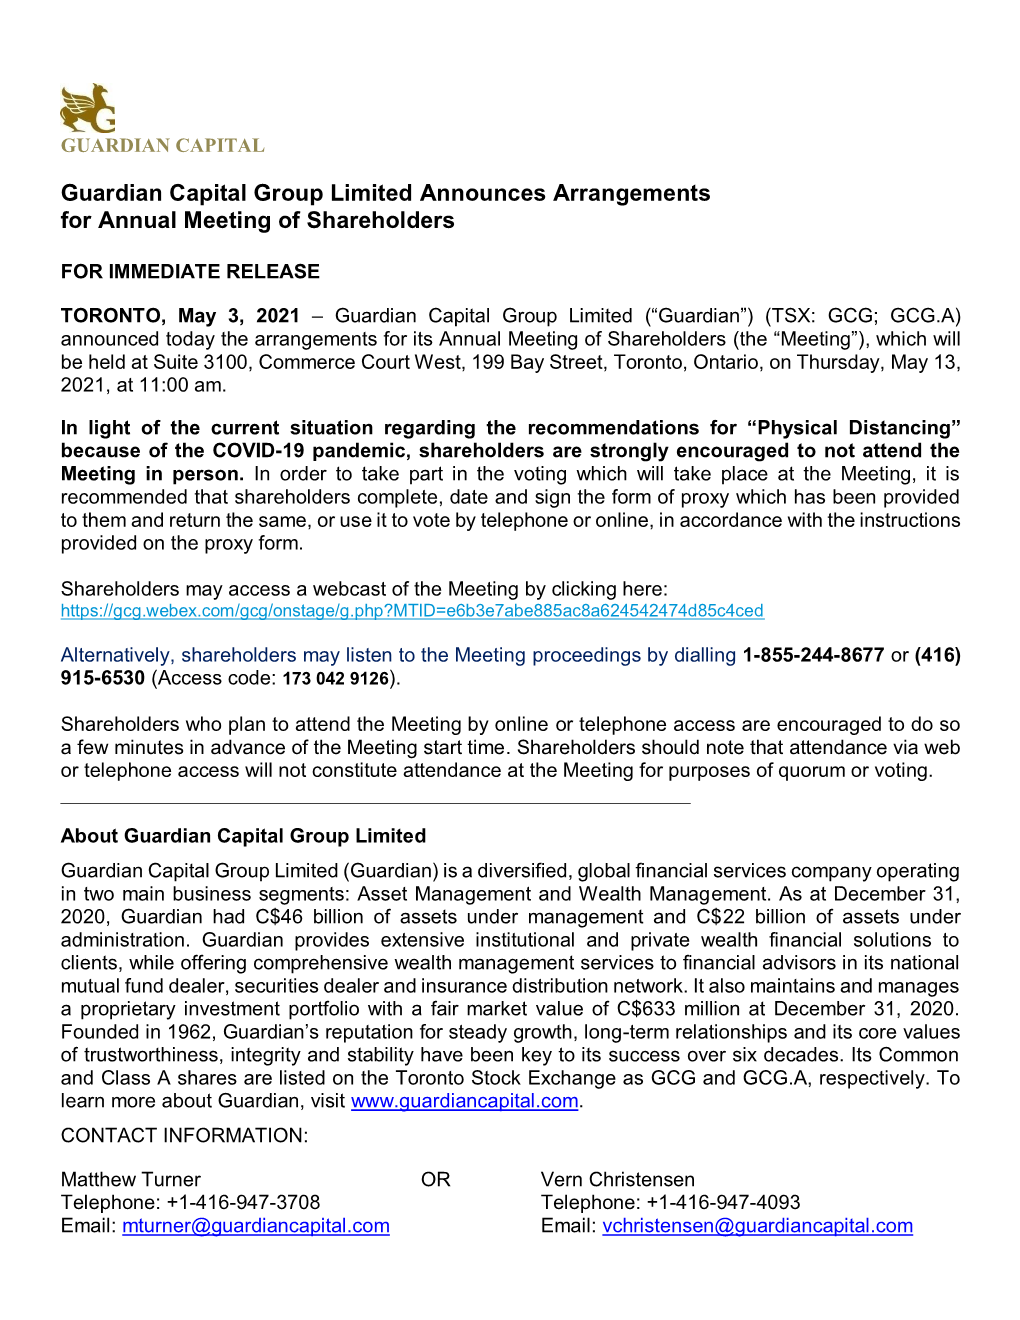 Guardian Capital Group Limited Announces Arrangements for Annual Meeting of Shareholders